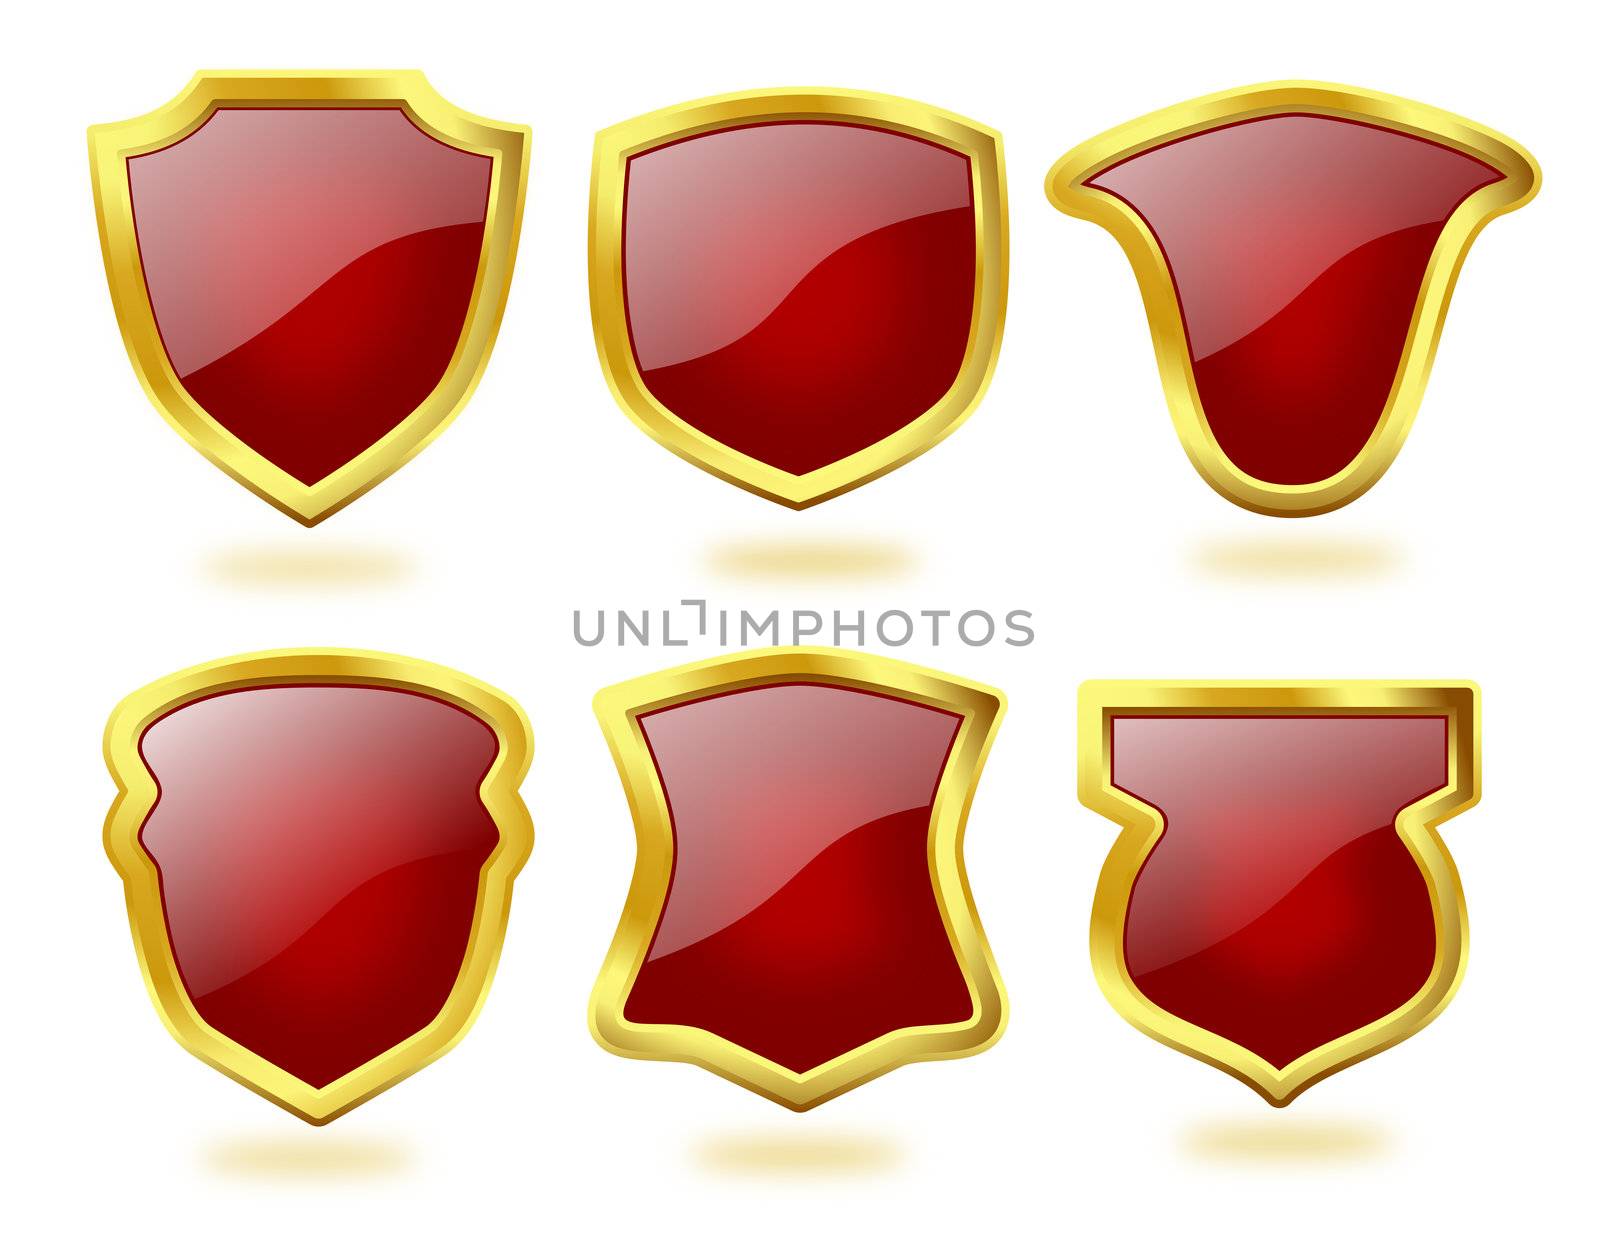 Set of Deep Red Shield Icons with Golden Frame by RichieThakur